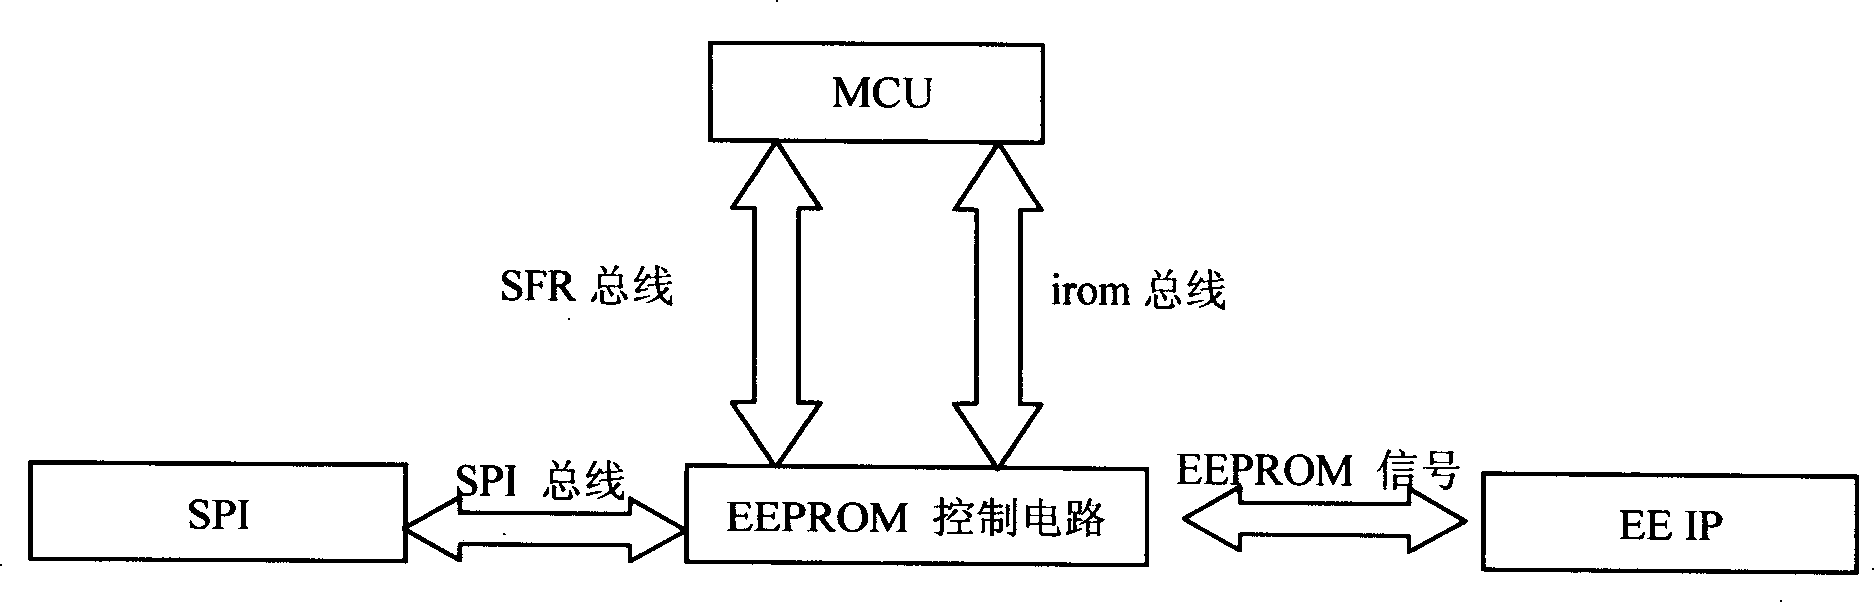 Control circuit and method for controlling a plurality of a plurality of EEPROM operation modes of MCU series products